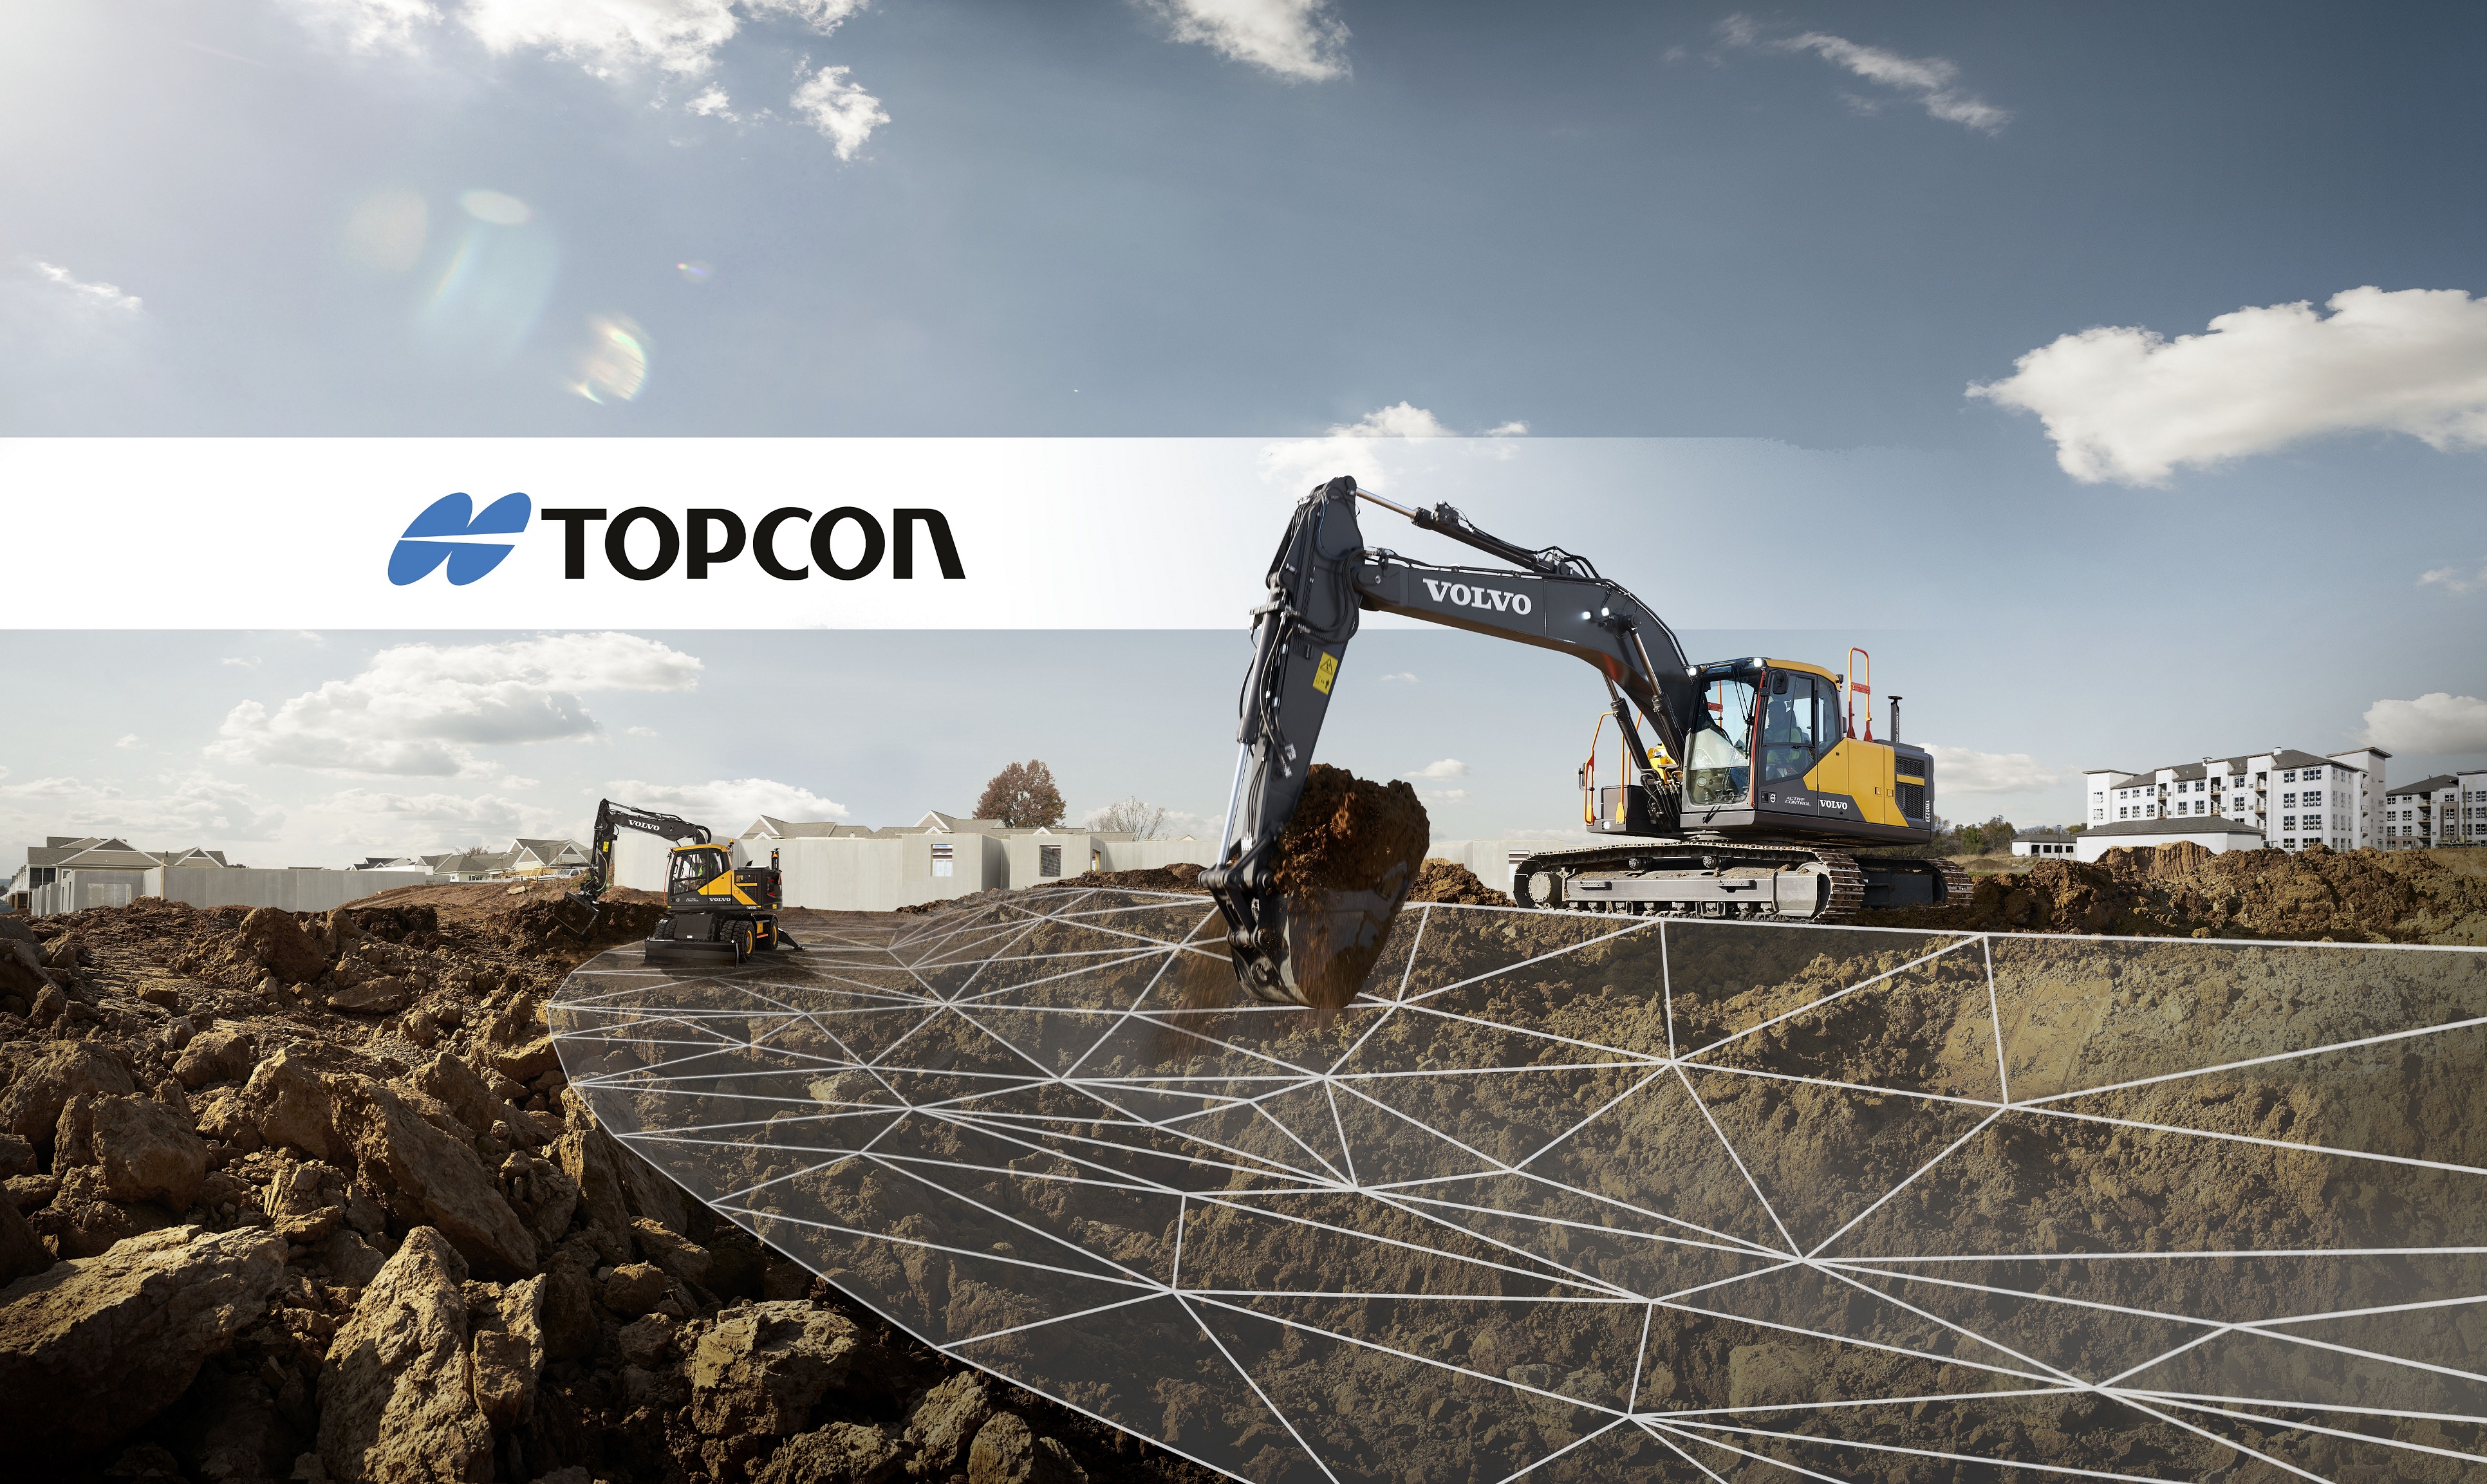 Integration of Topcon 3D-MC with Volvo Active Control raises the bar in excavation precision